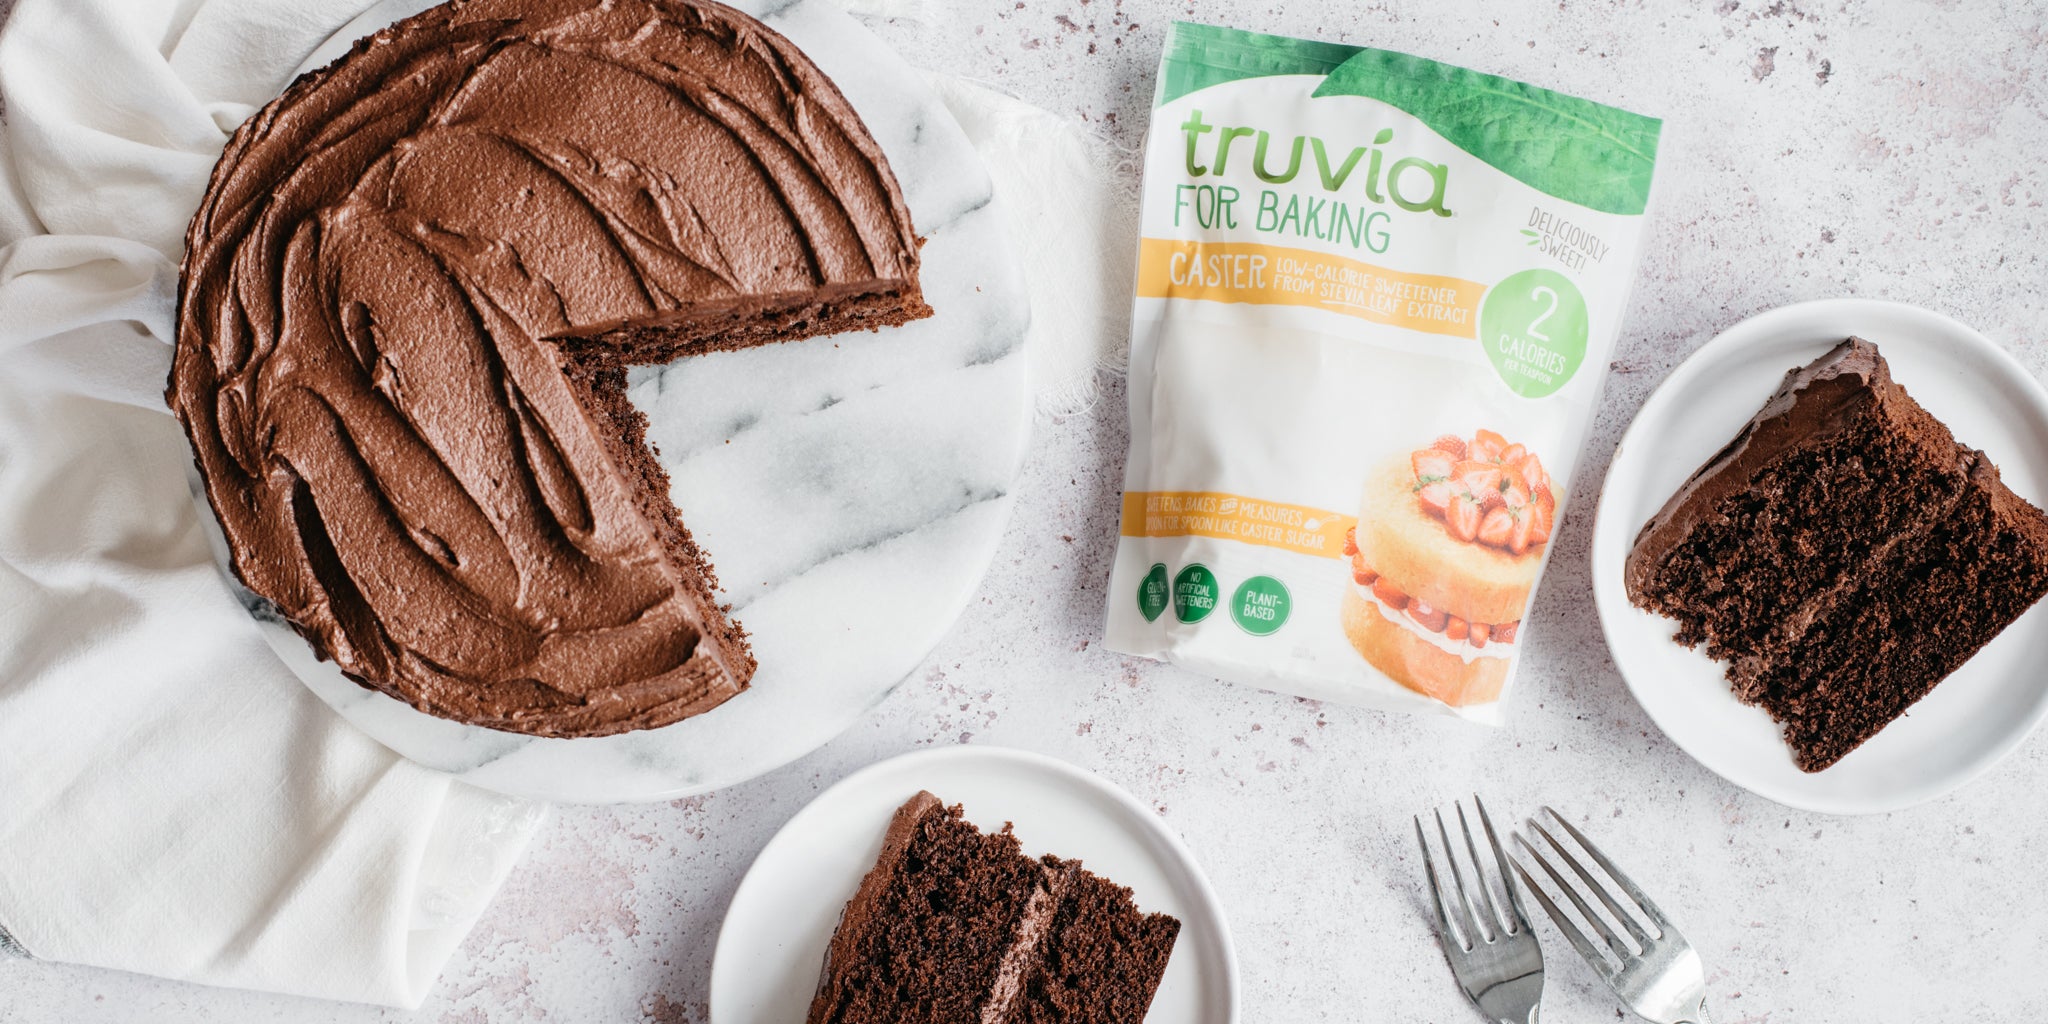 Top down shot of chocolate cake with truvia sweetener pack beside it and two slices of chocolate cake